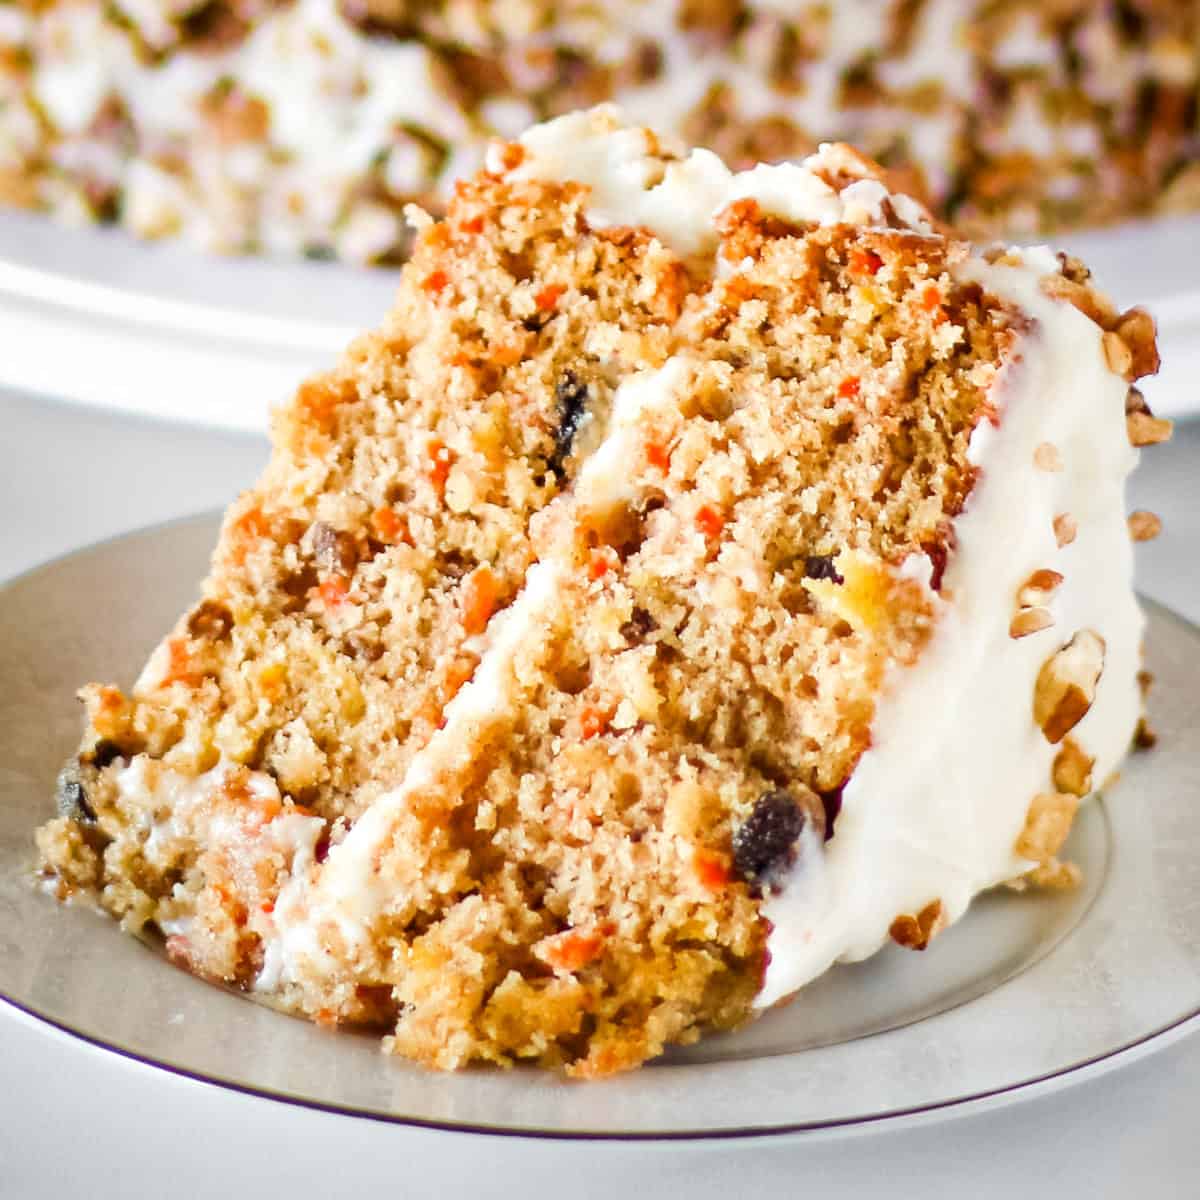 A slice of homemade carrot cake with cream cheese frosting on a white plate.